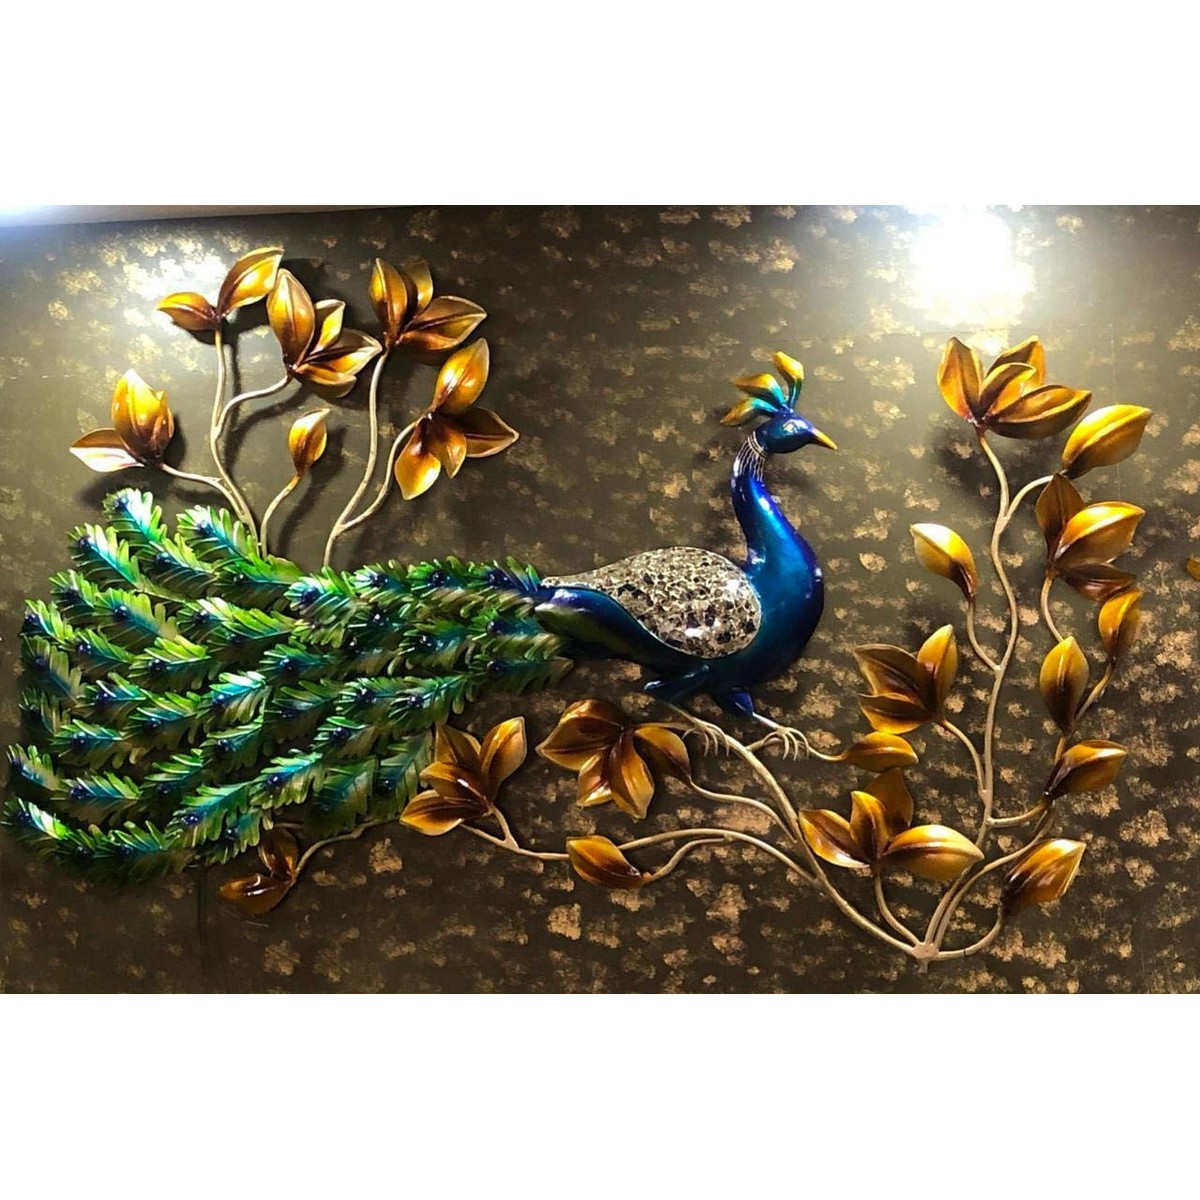 Wall Mounted Full Peacock Decorative Artwork - RichesM Healthcare